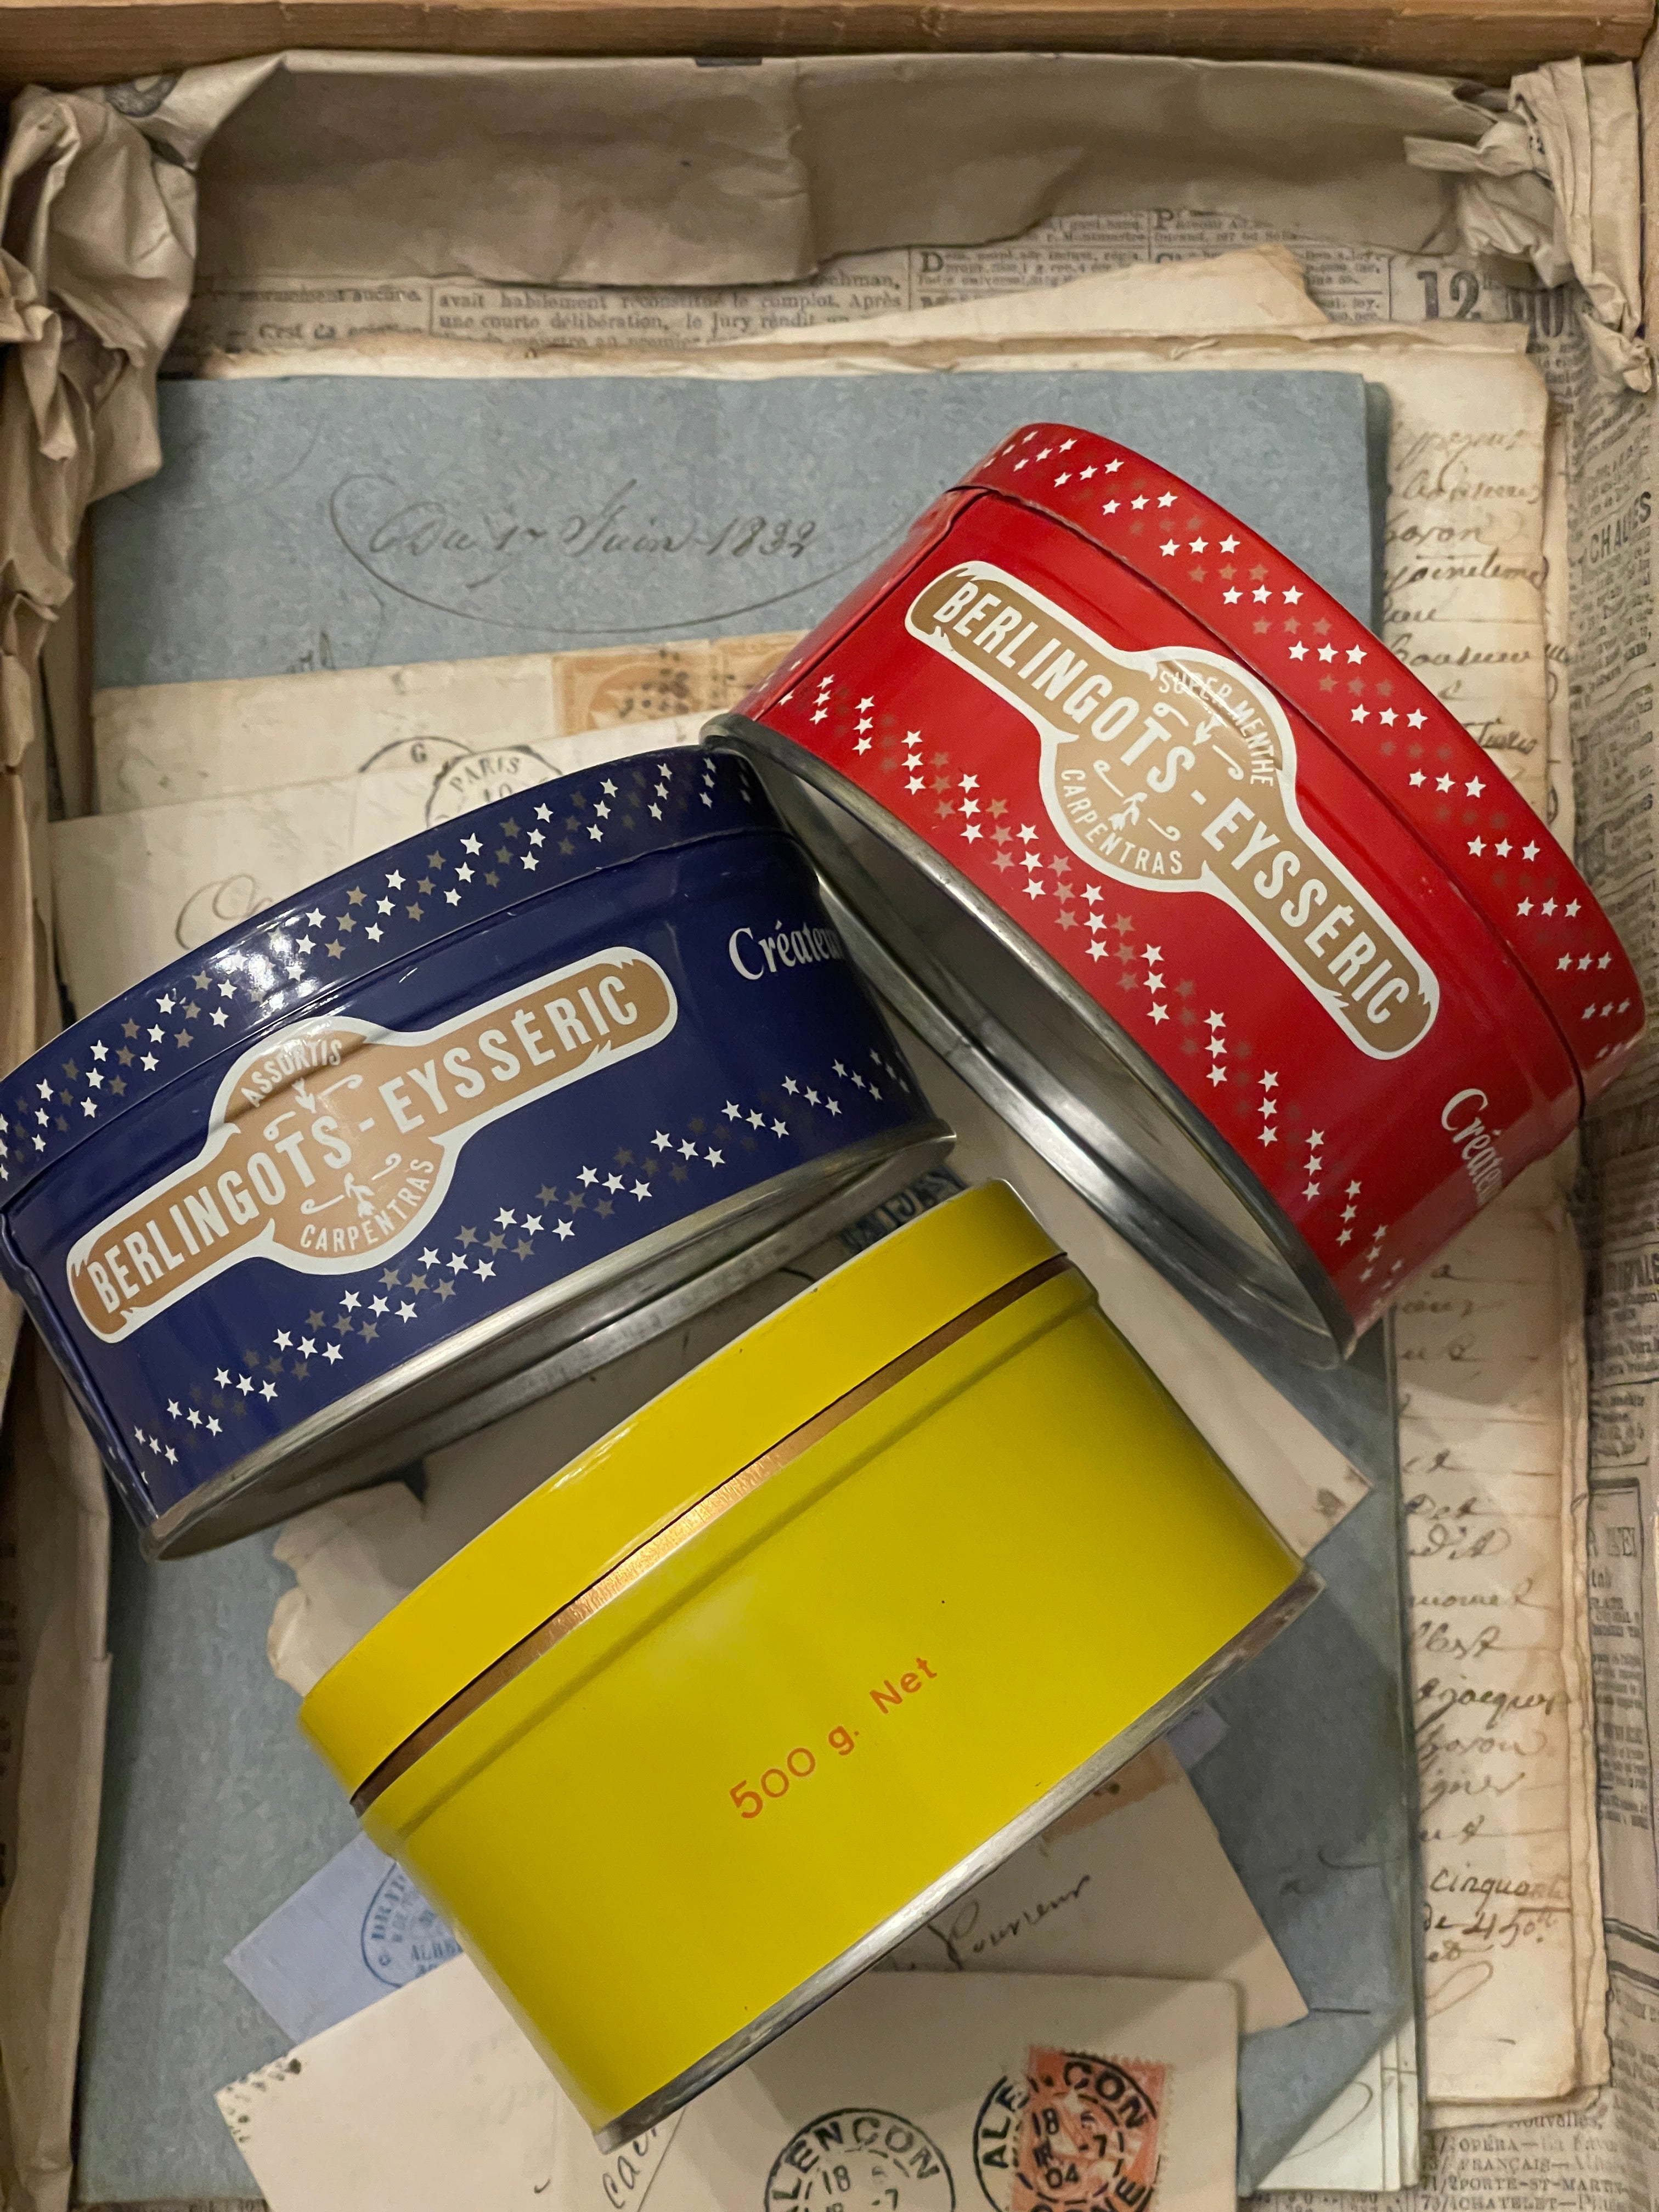 Darling Vintage French Berginlots Candy Tins from France